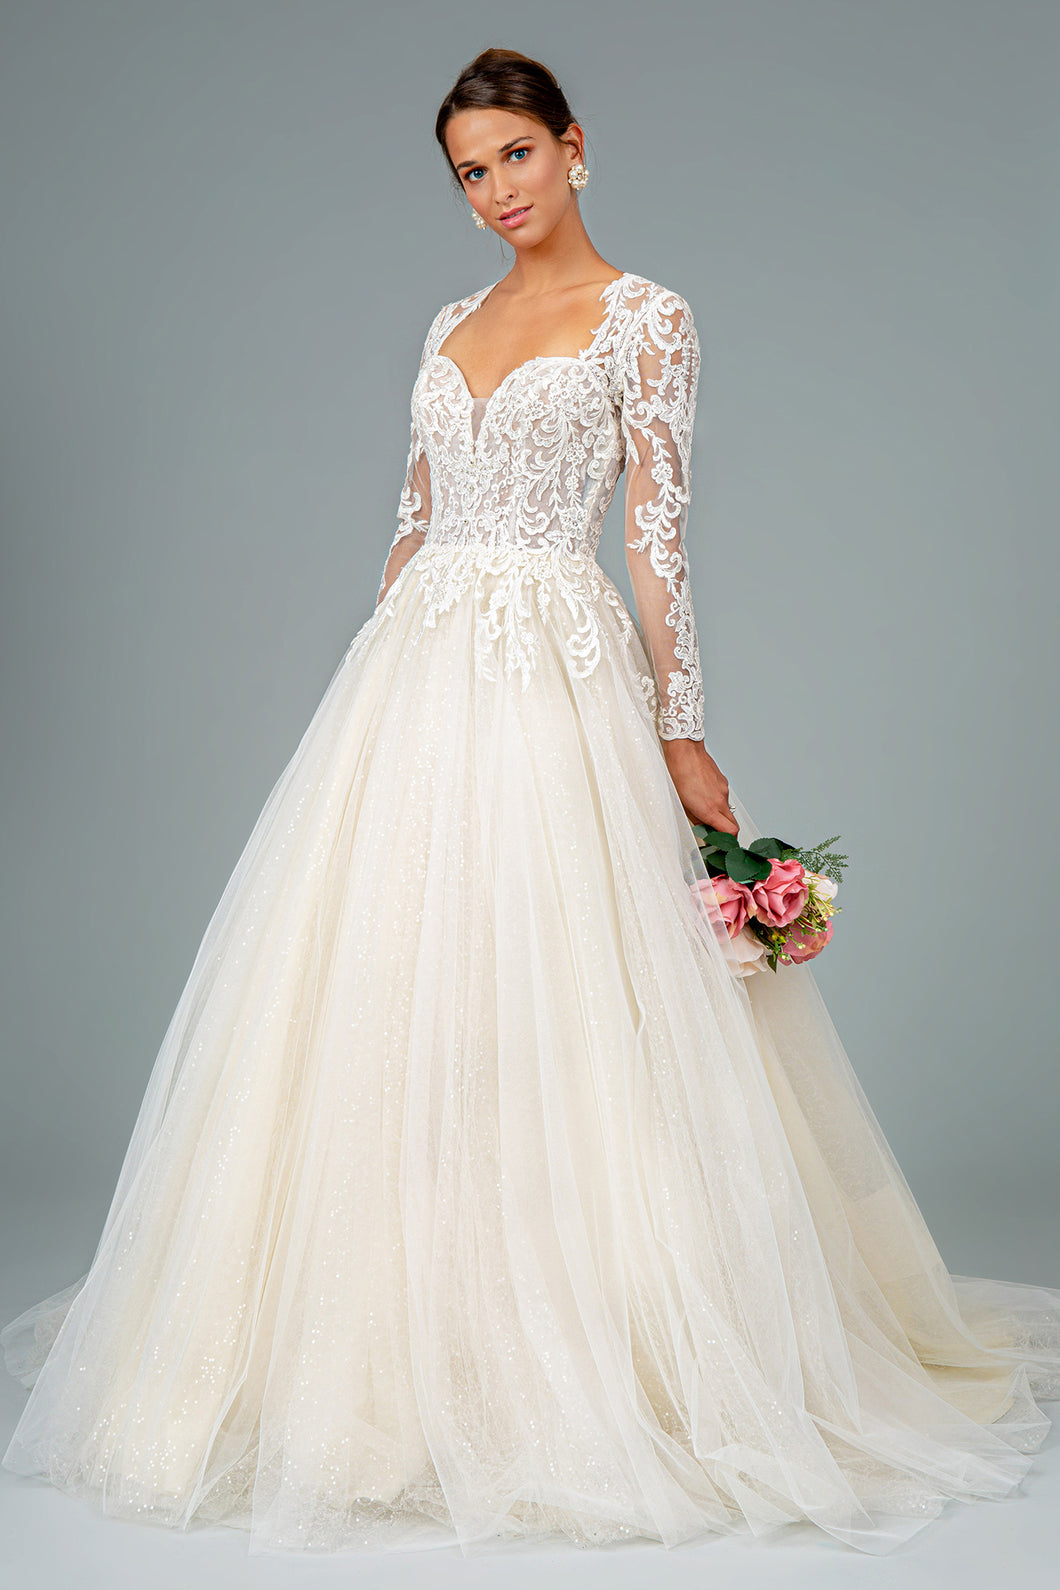 Camille Wedding Dress Long Sleeve Sweetheart Neckline Bridal Gown 2601804HER-Ivory SAMPLE IN STORE